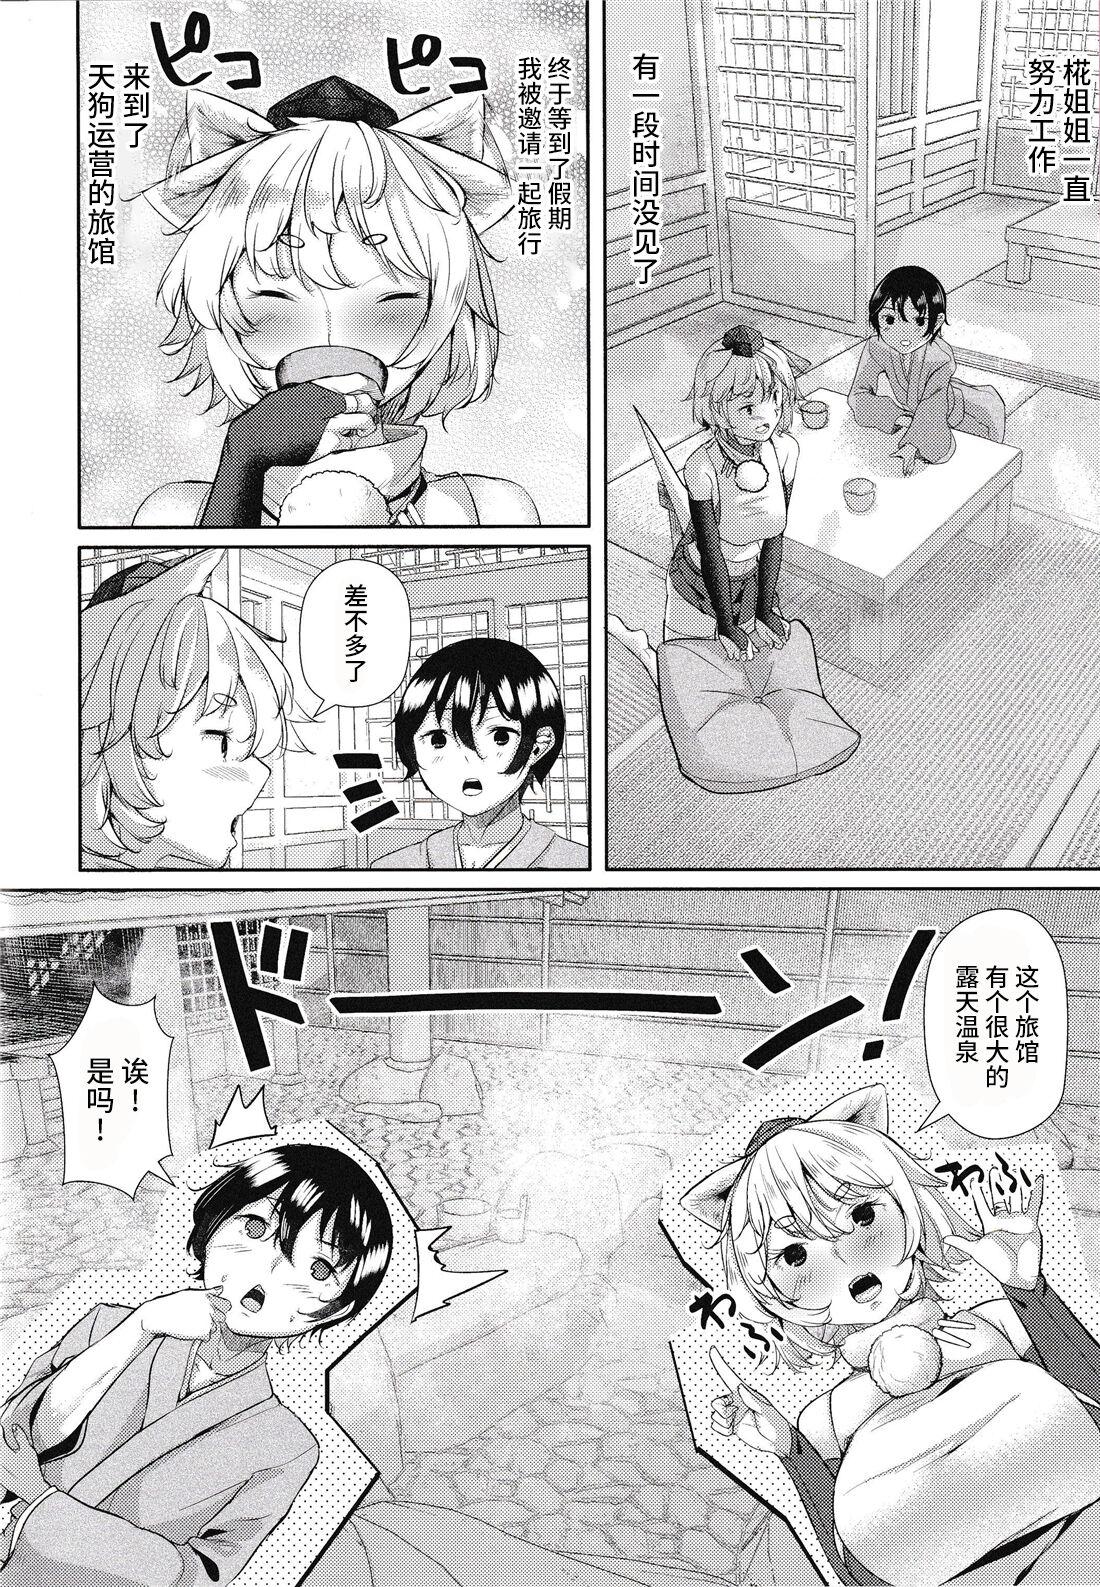 Transgender 犬のお姉ちゃんと温泉旅行 - Touhou project Vip - Page 4